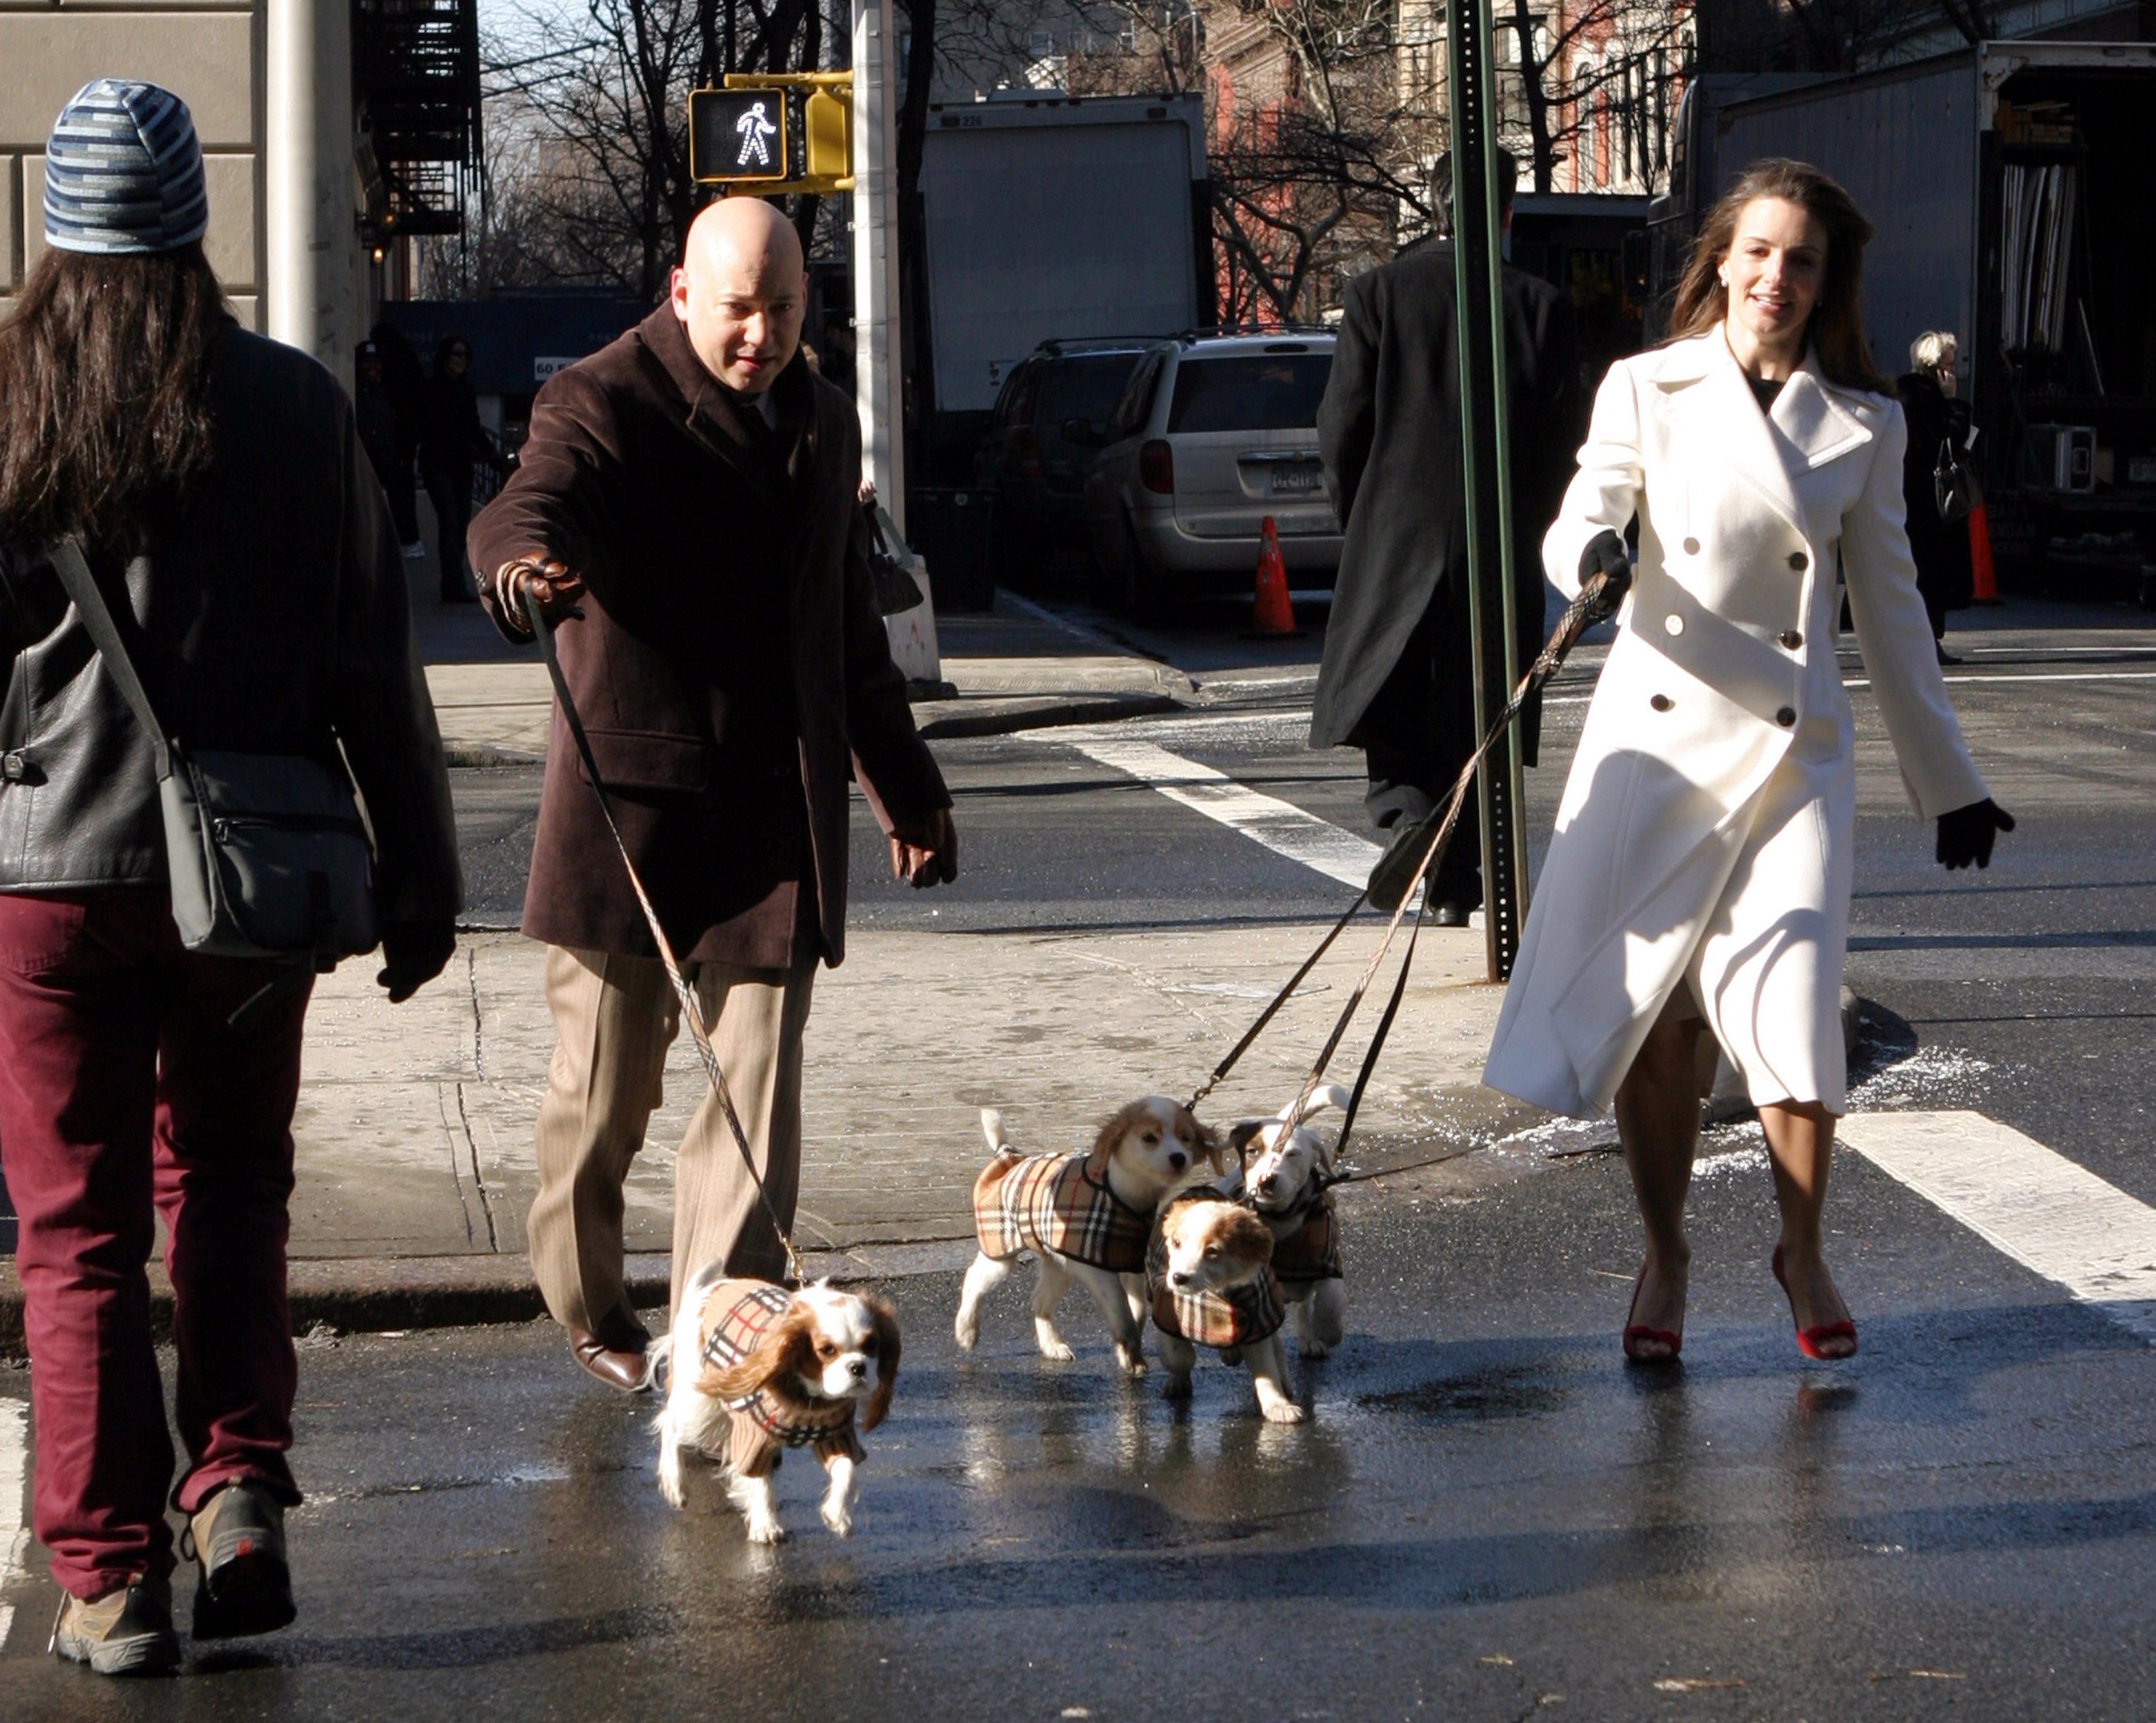 Evan Handler as Harry Goldenblatt and Kristin Davis as Charlotte York with their dogs walk down a Manhattan Street during the filming of season 6 of 'Sex and the City'